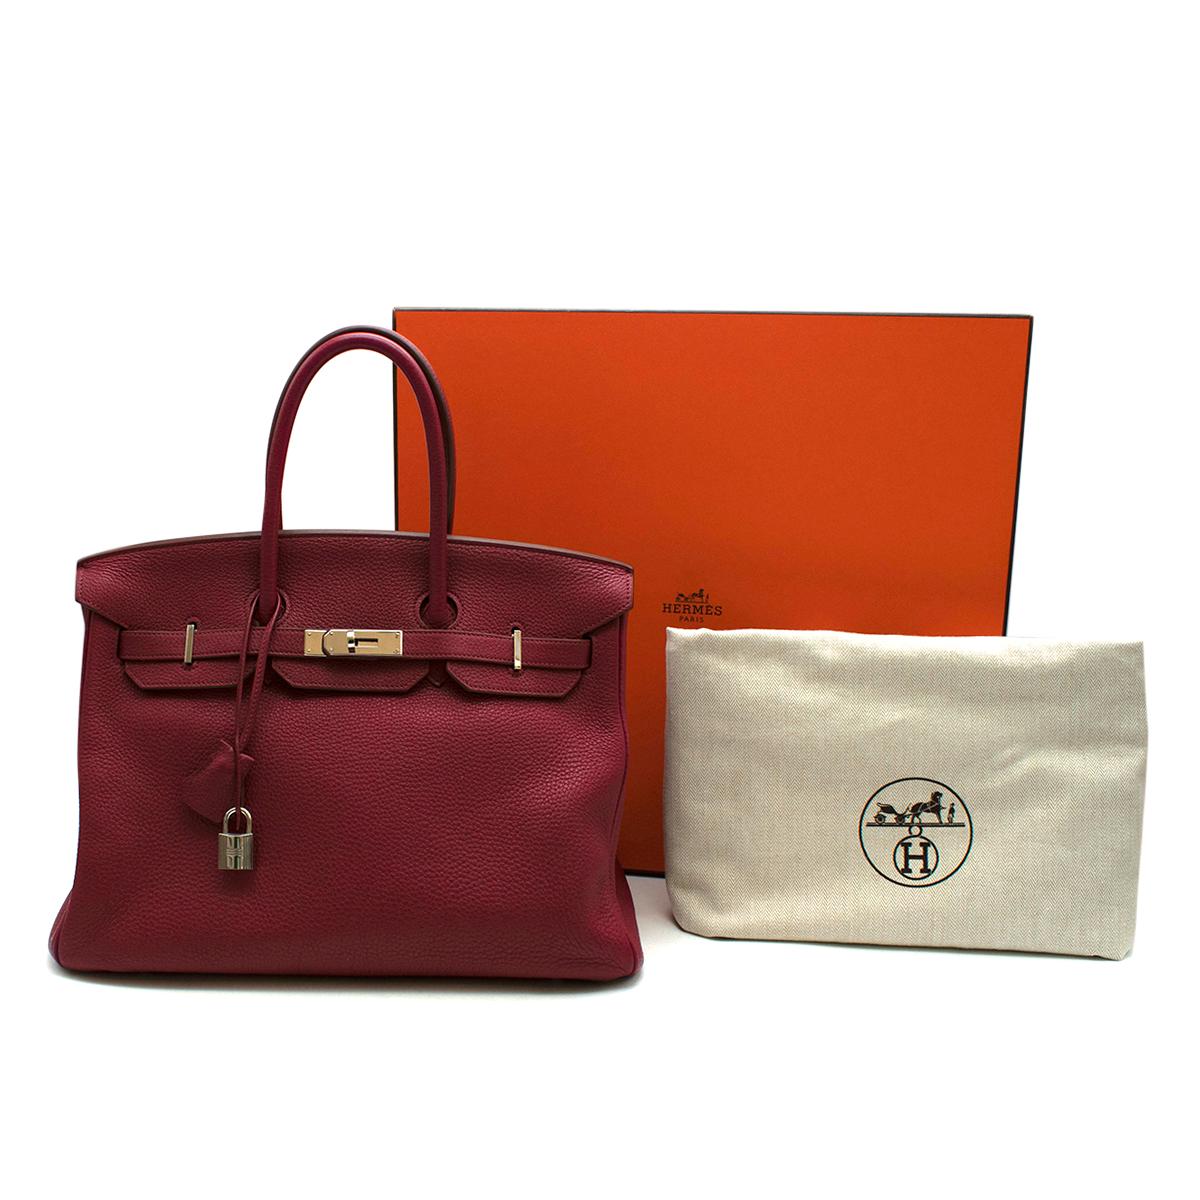 Hermes Togo Leather Rubis Birkin 35 PHW

The most desired Hermes bag, the Birkin is a timeless style with a better investment rate than Gold! This 35, the most popular style is in a soft ruby red which contrasts beautifully with the palladium plated